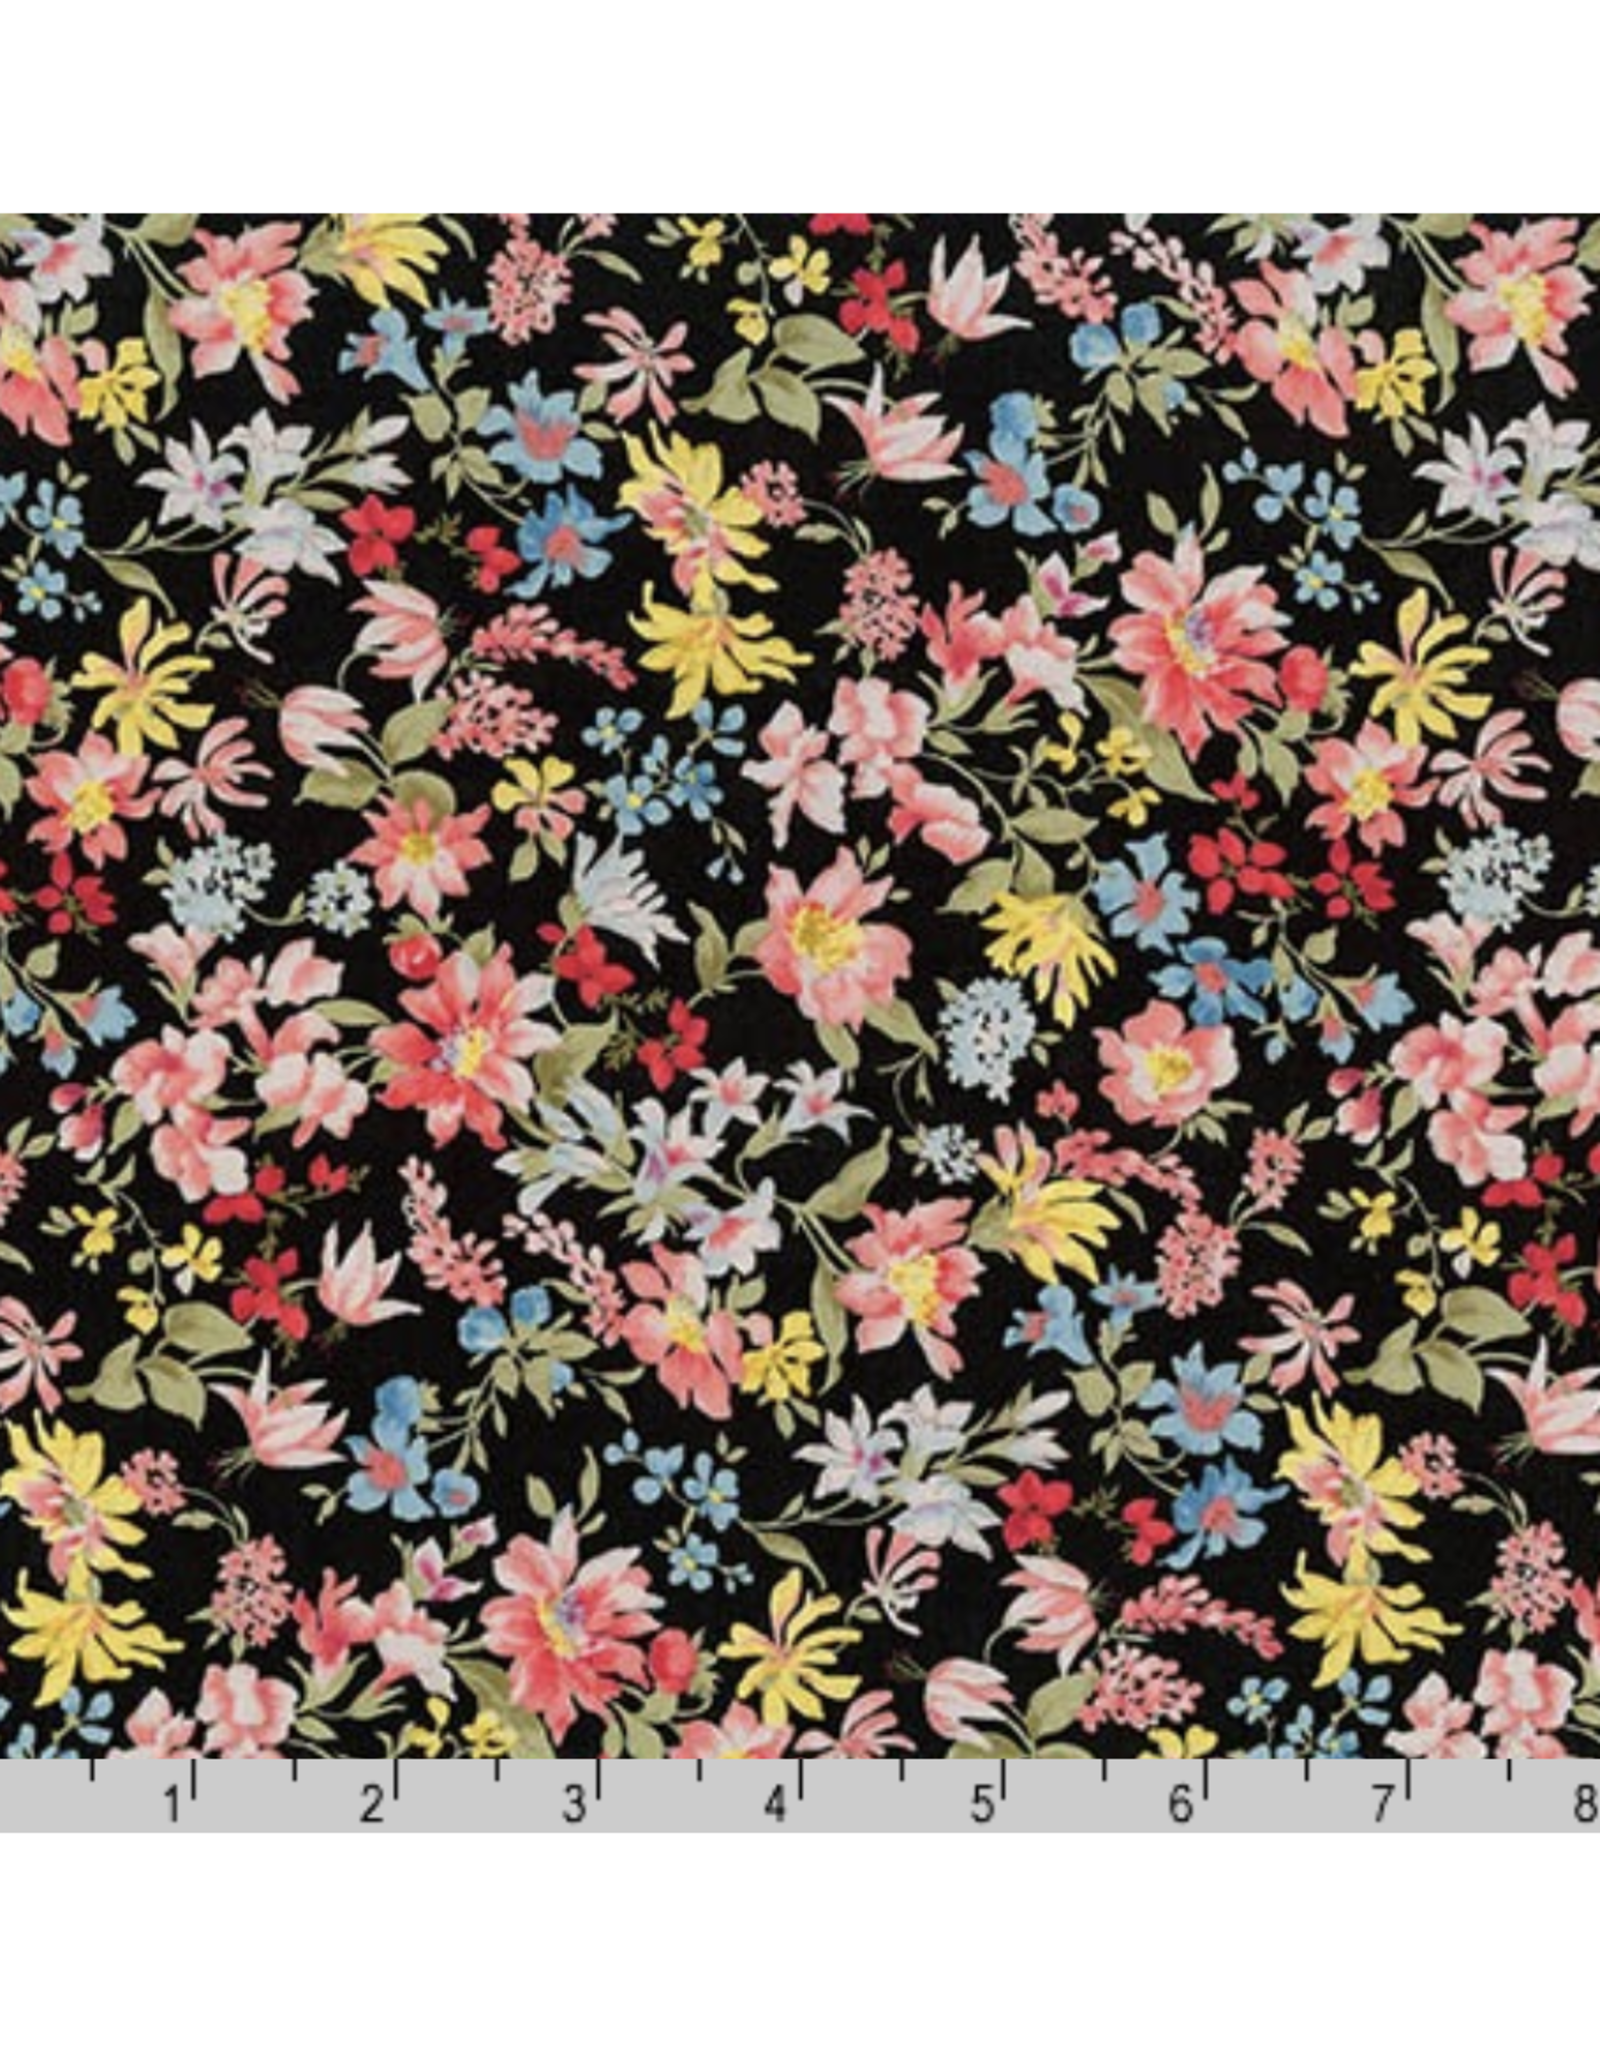 Sevenberry Cotton Lawn, Petite Garden Lawn in Black with Bright, Fabric Half-Yards